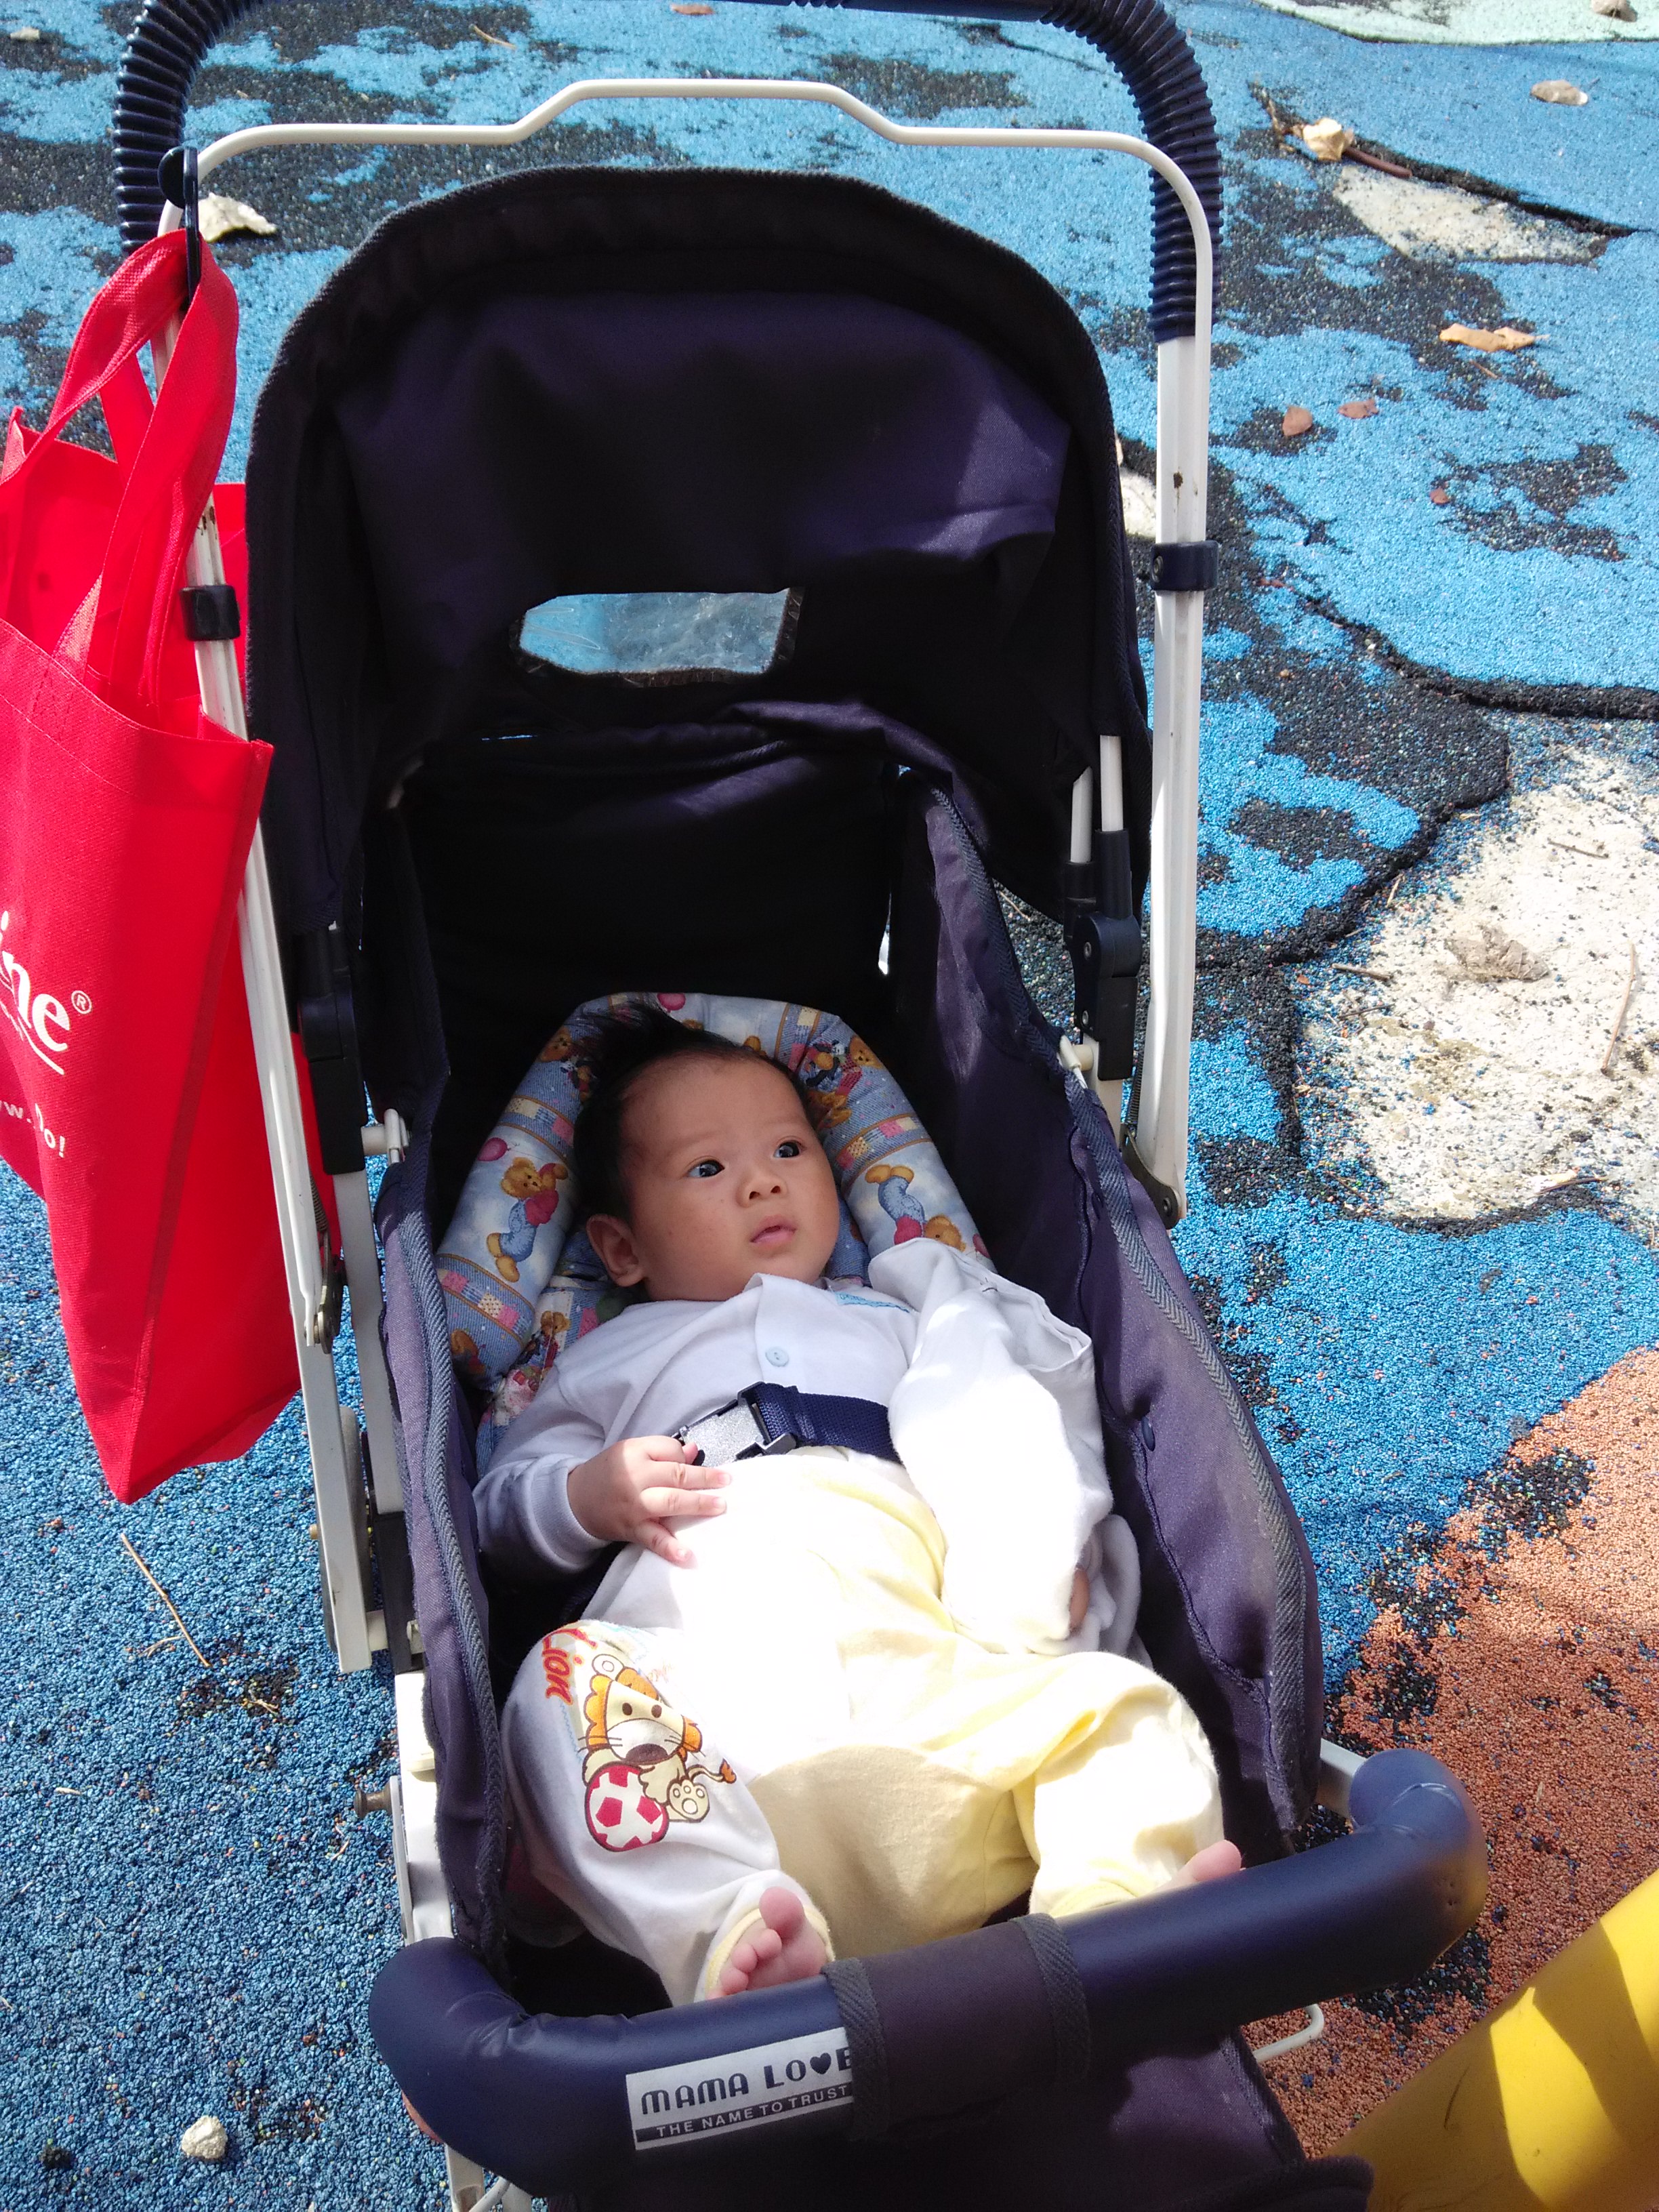 My baby in the stroller